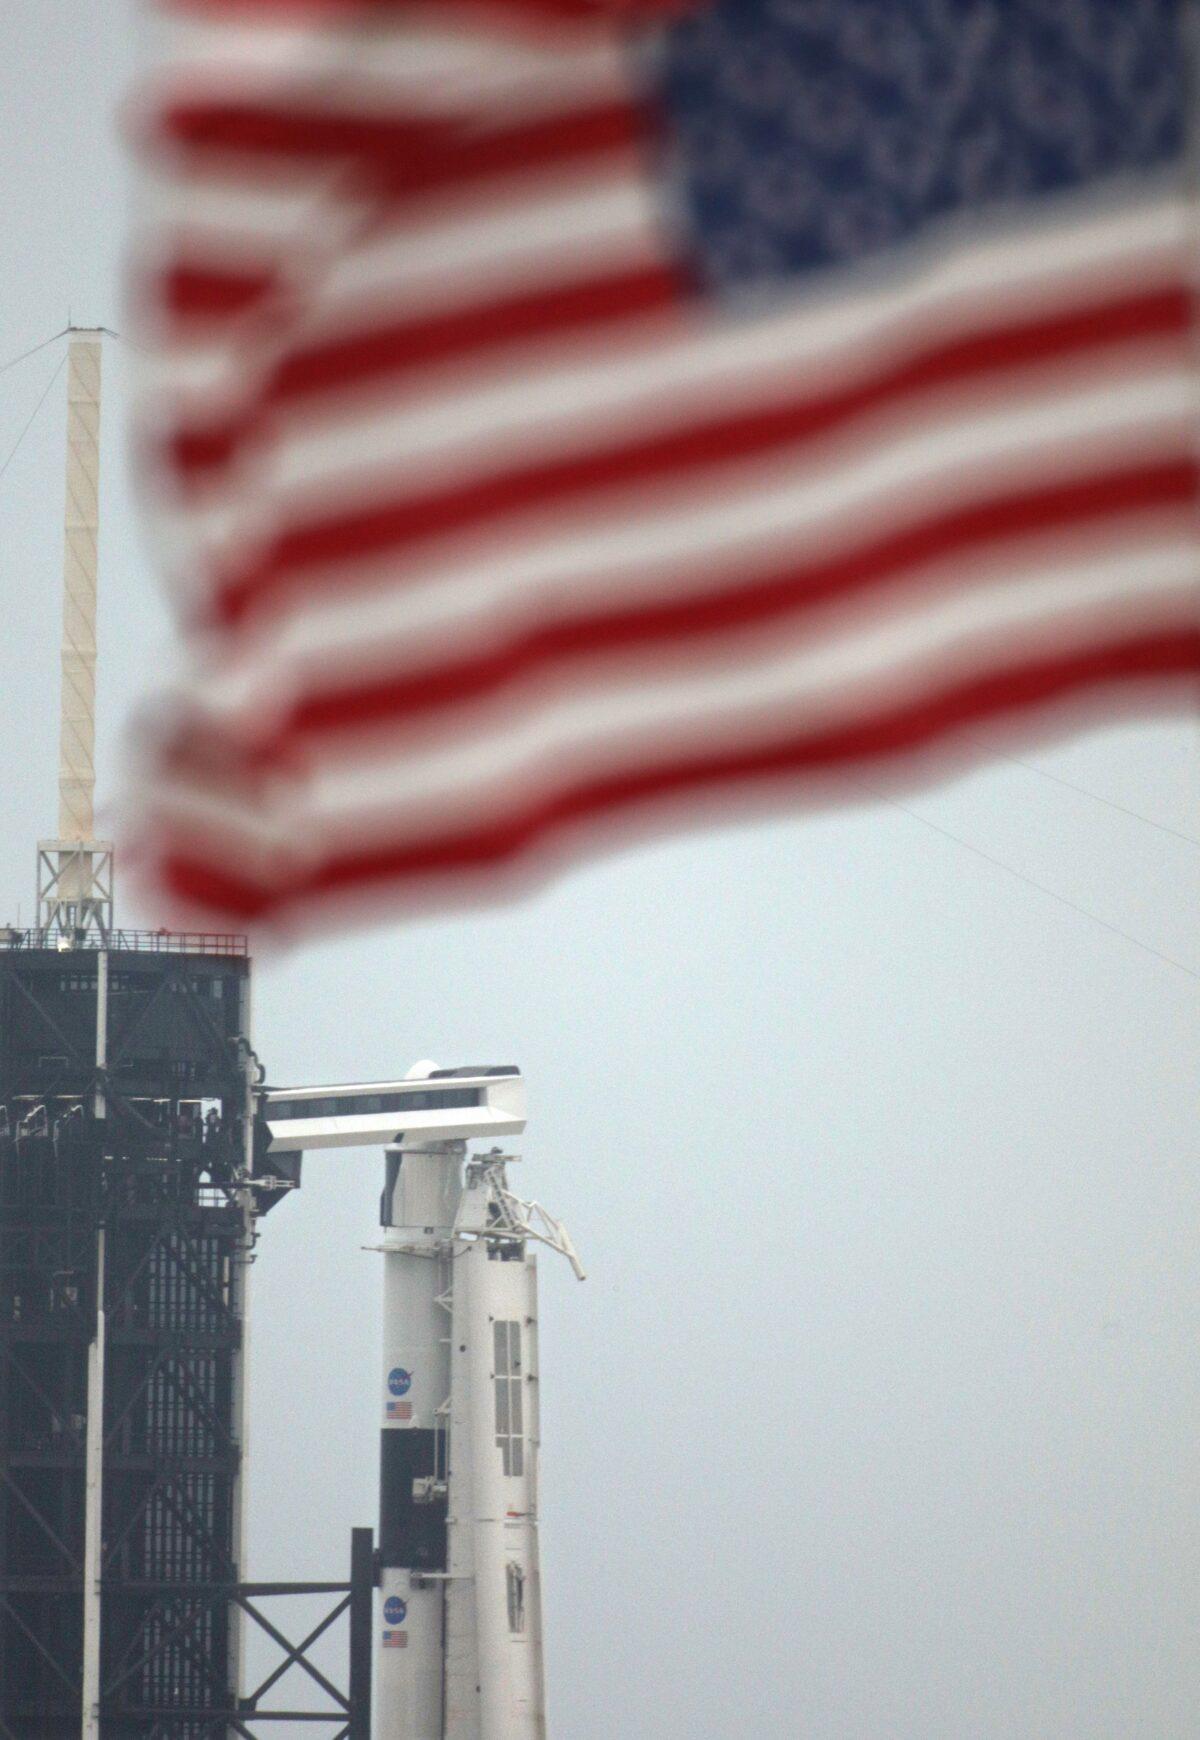 An American flag flutters above the crew access arm (top C) which is seen leading to the Crew Dragon spacecraft atop a SpaceX Falcon 9 rocket, at launch complex 39A at the Kennedy Space Center in Florida on May 25, 2020. (Gregg Newton/AFP via Getty Images)